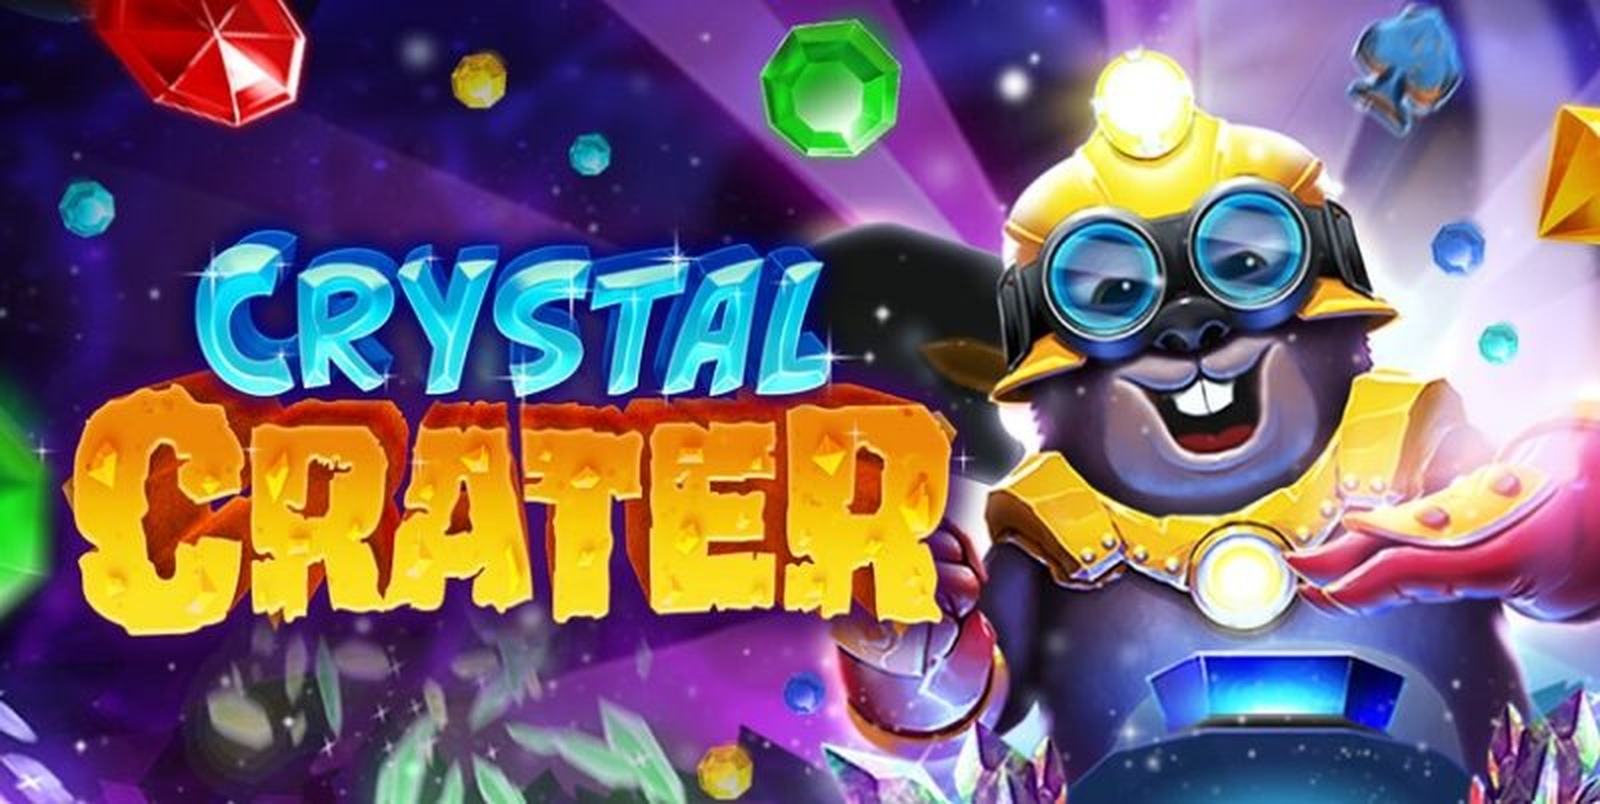 The Crystal Crater Online Slot Demo Game by Radi8